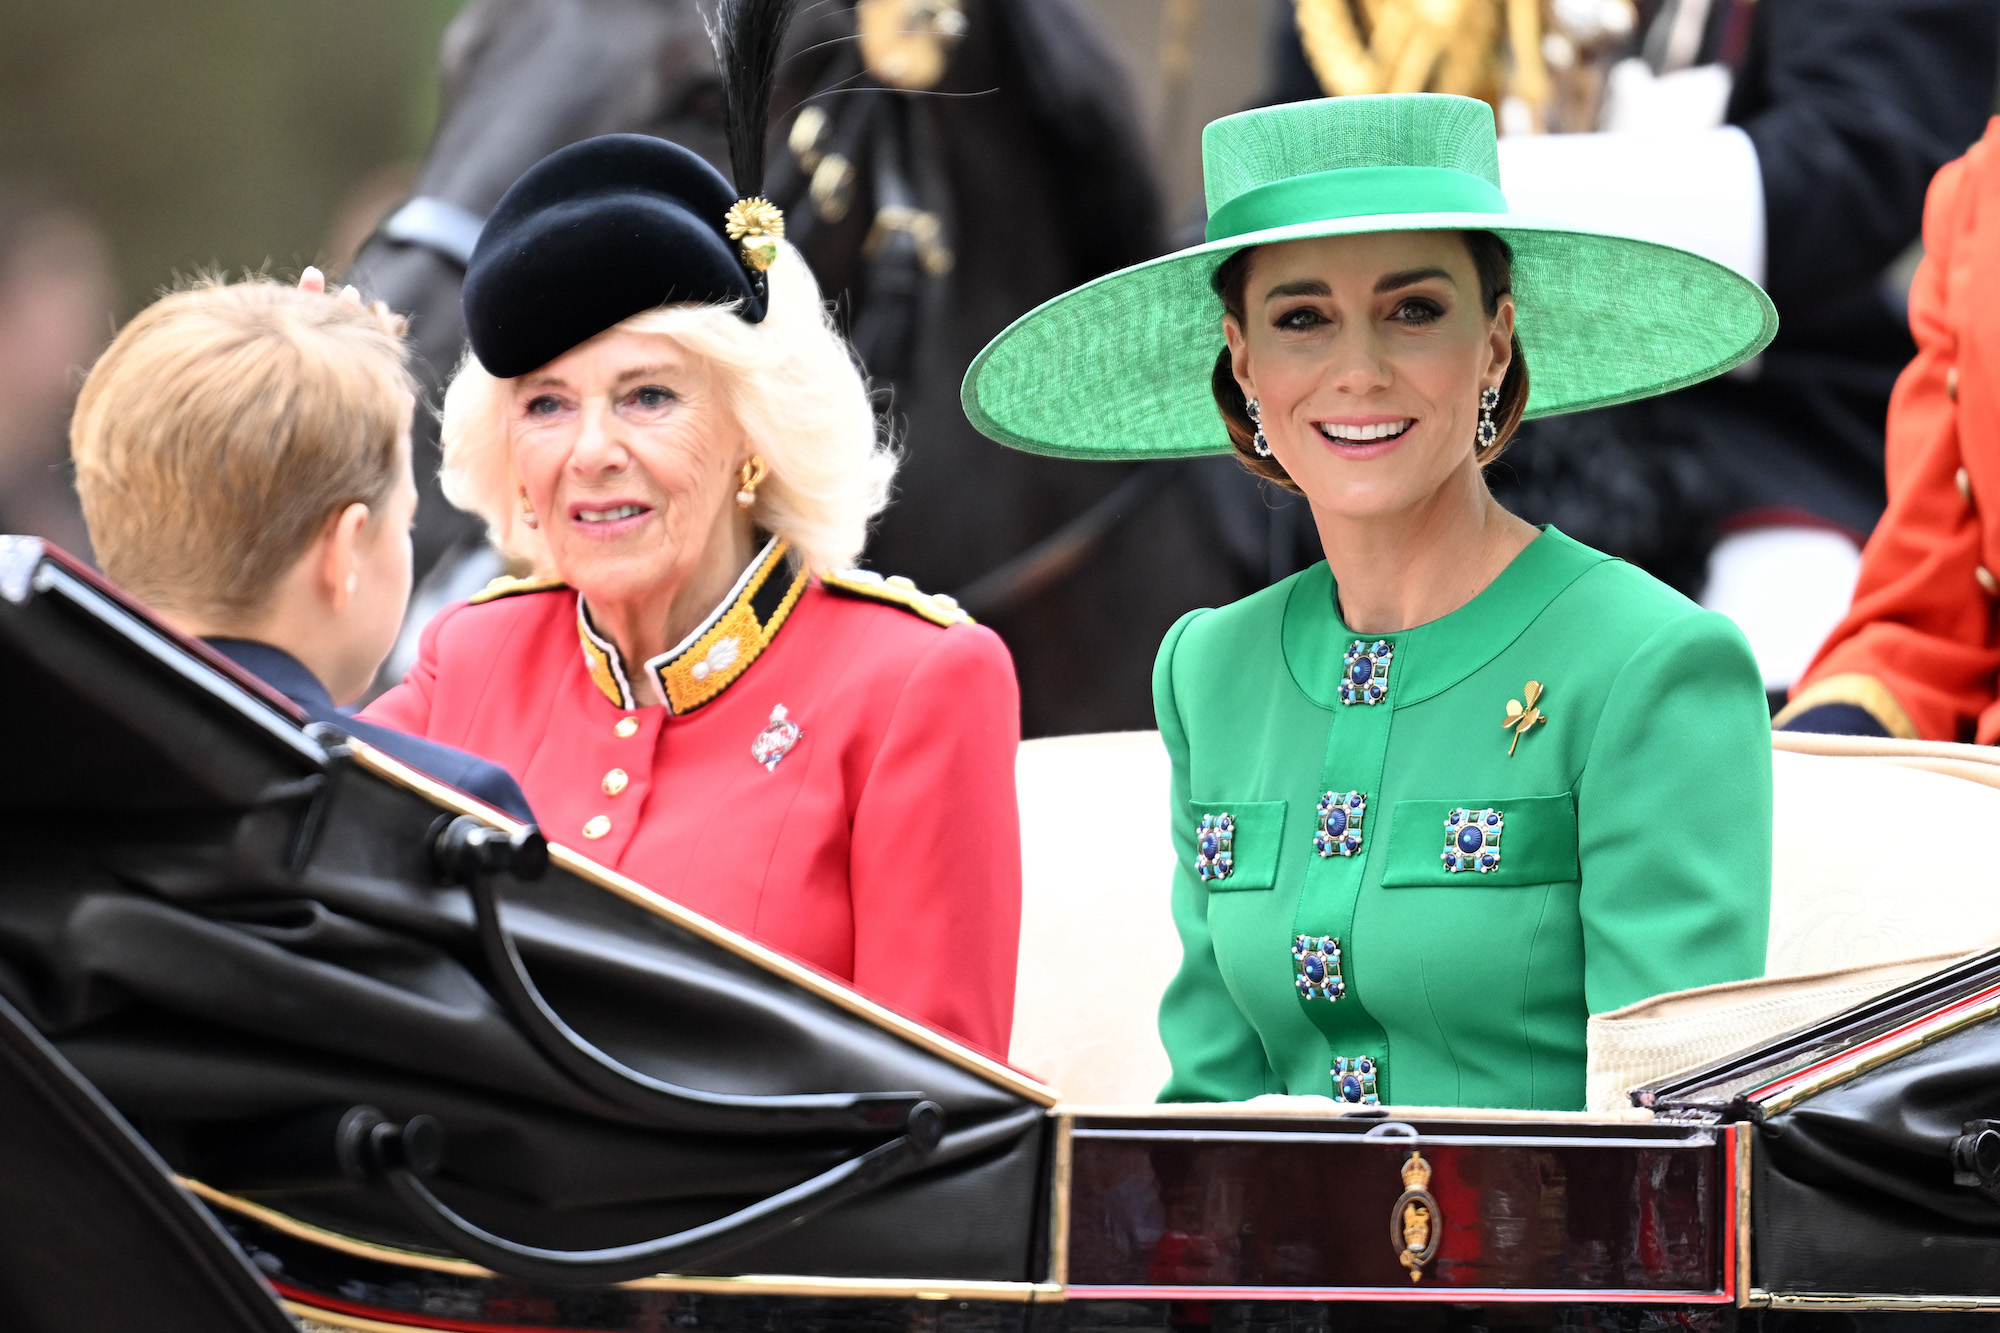 King Charles III's Trooping the Colour: Royal Family Attends | Us Weekly